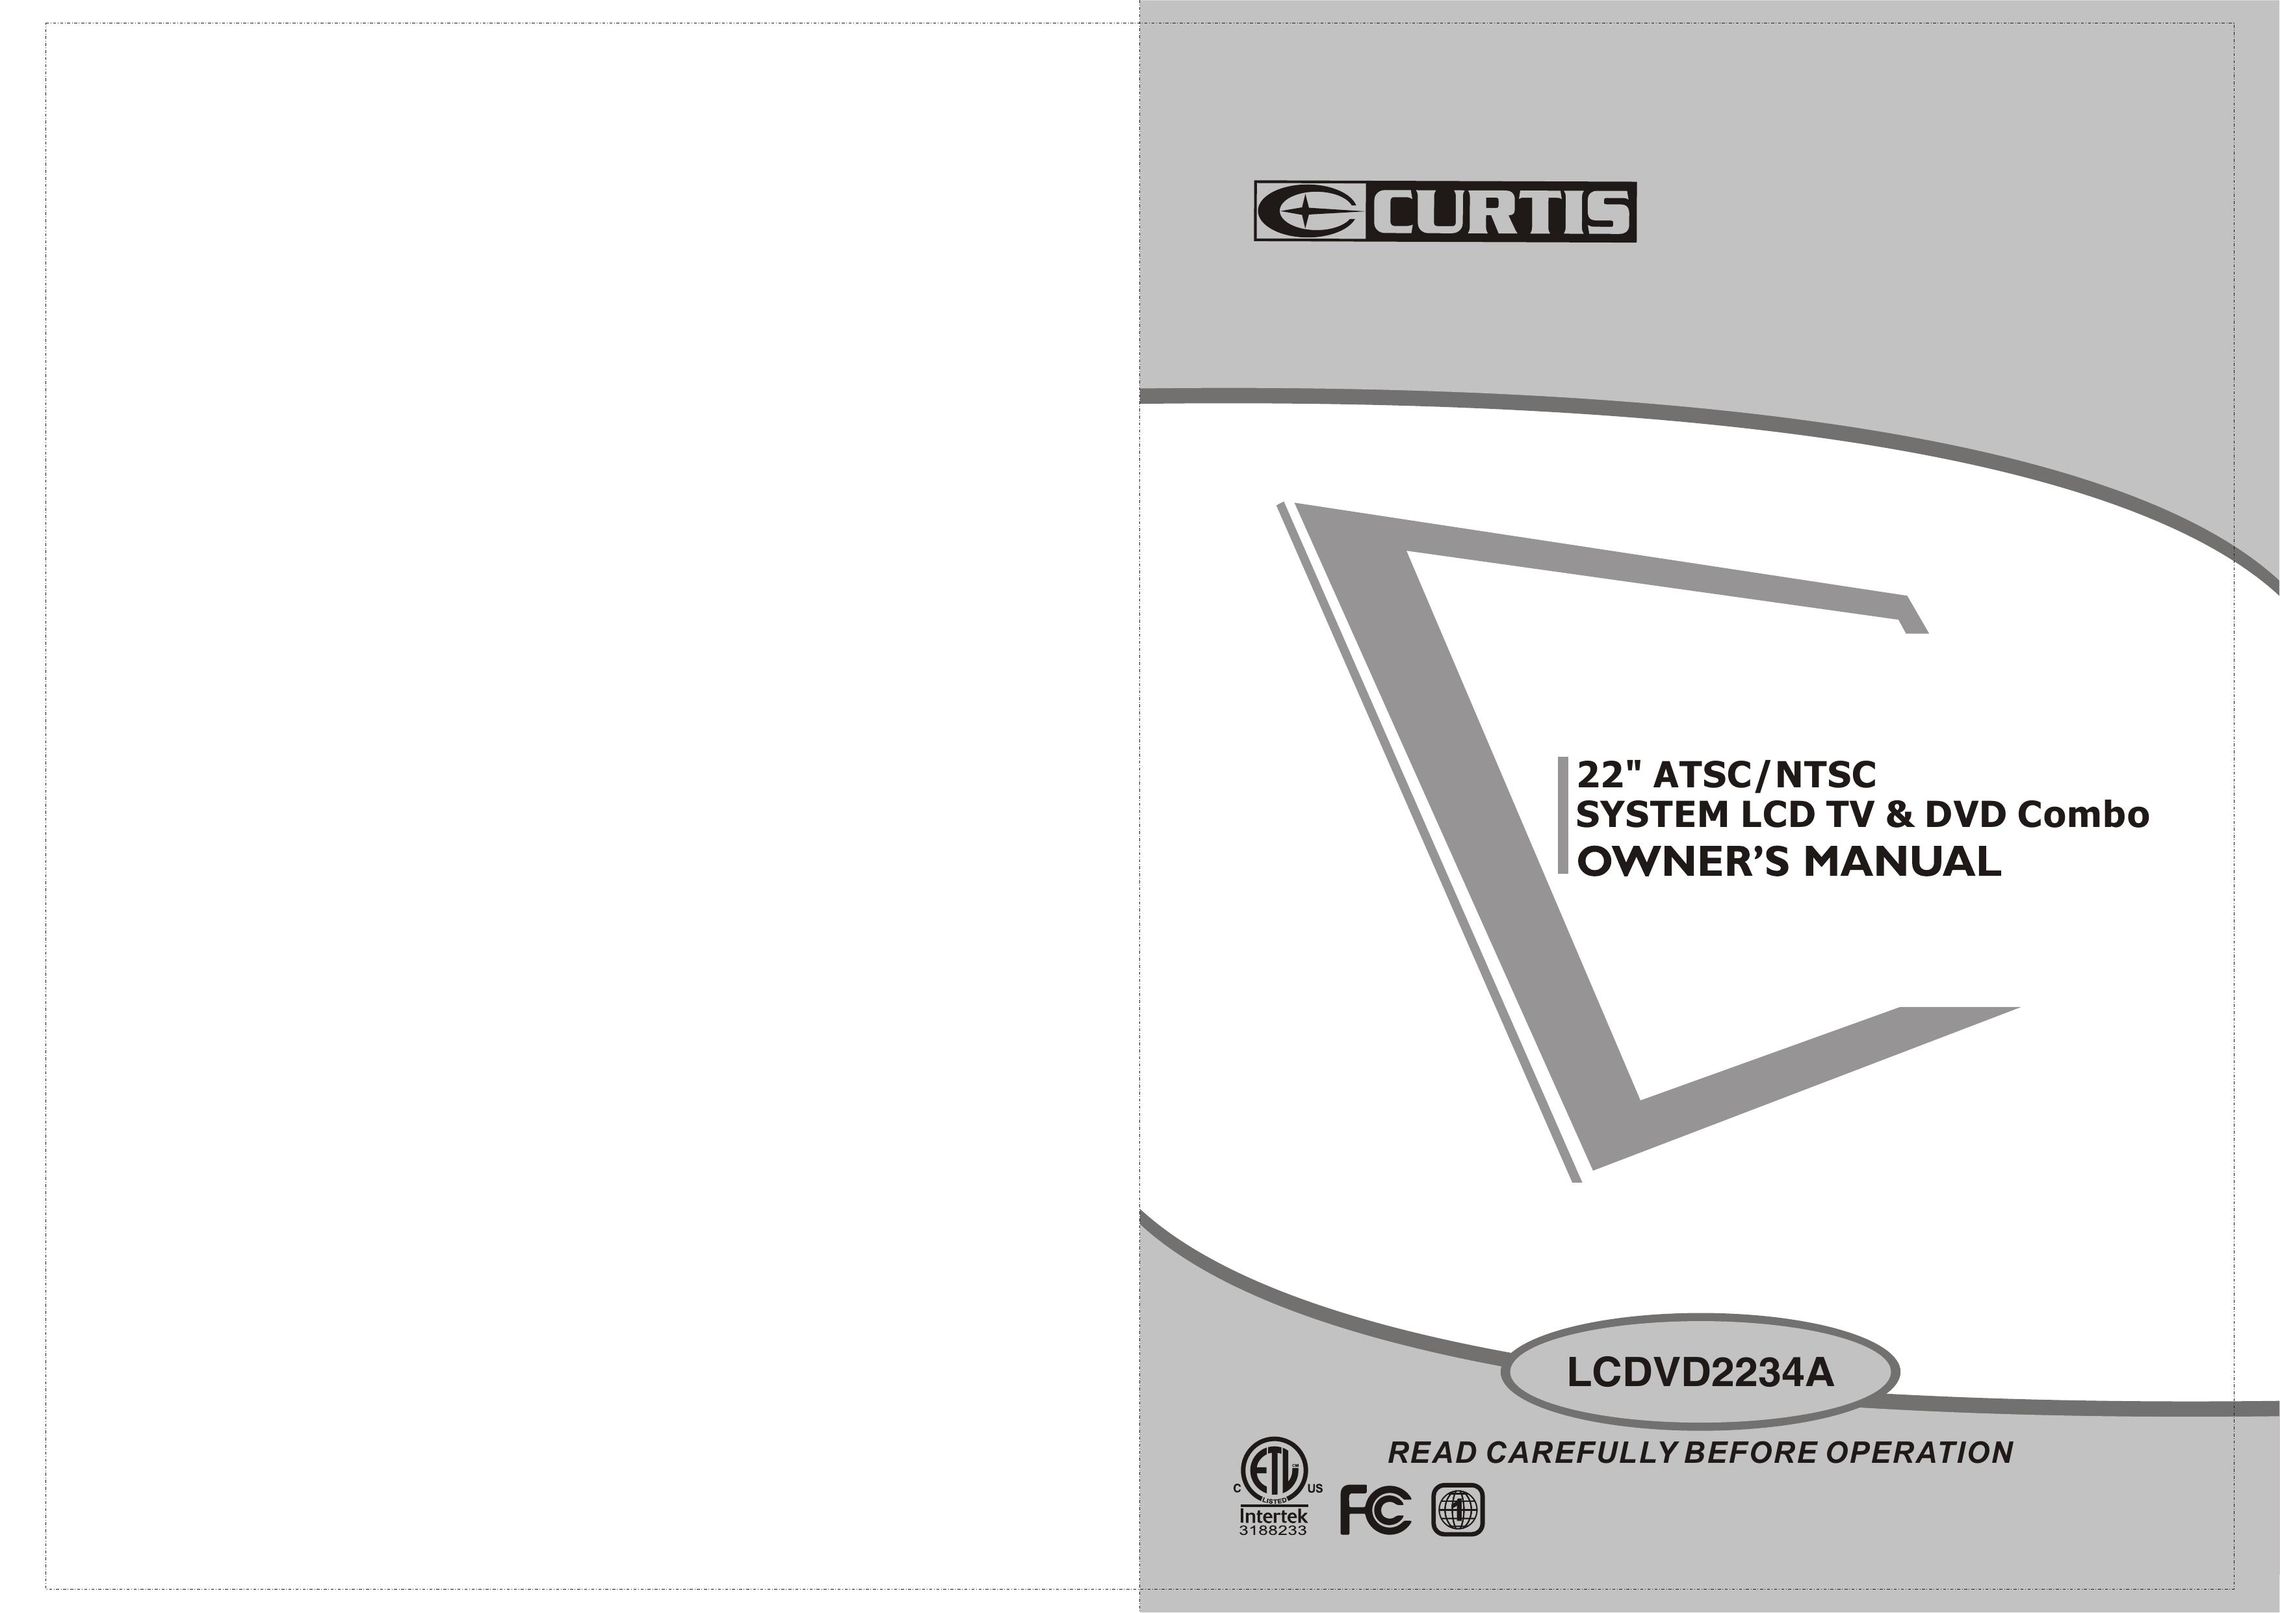 Curtis LCDVD2234A Flat Panel Television User Manual